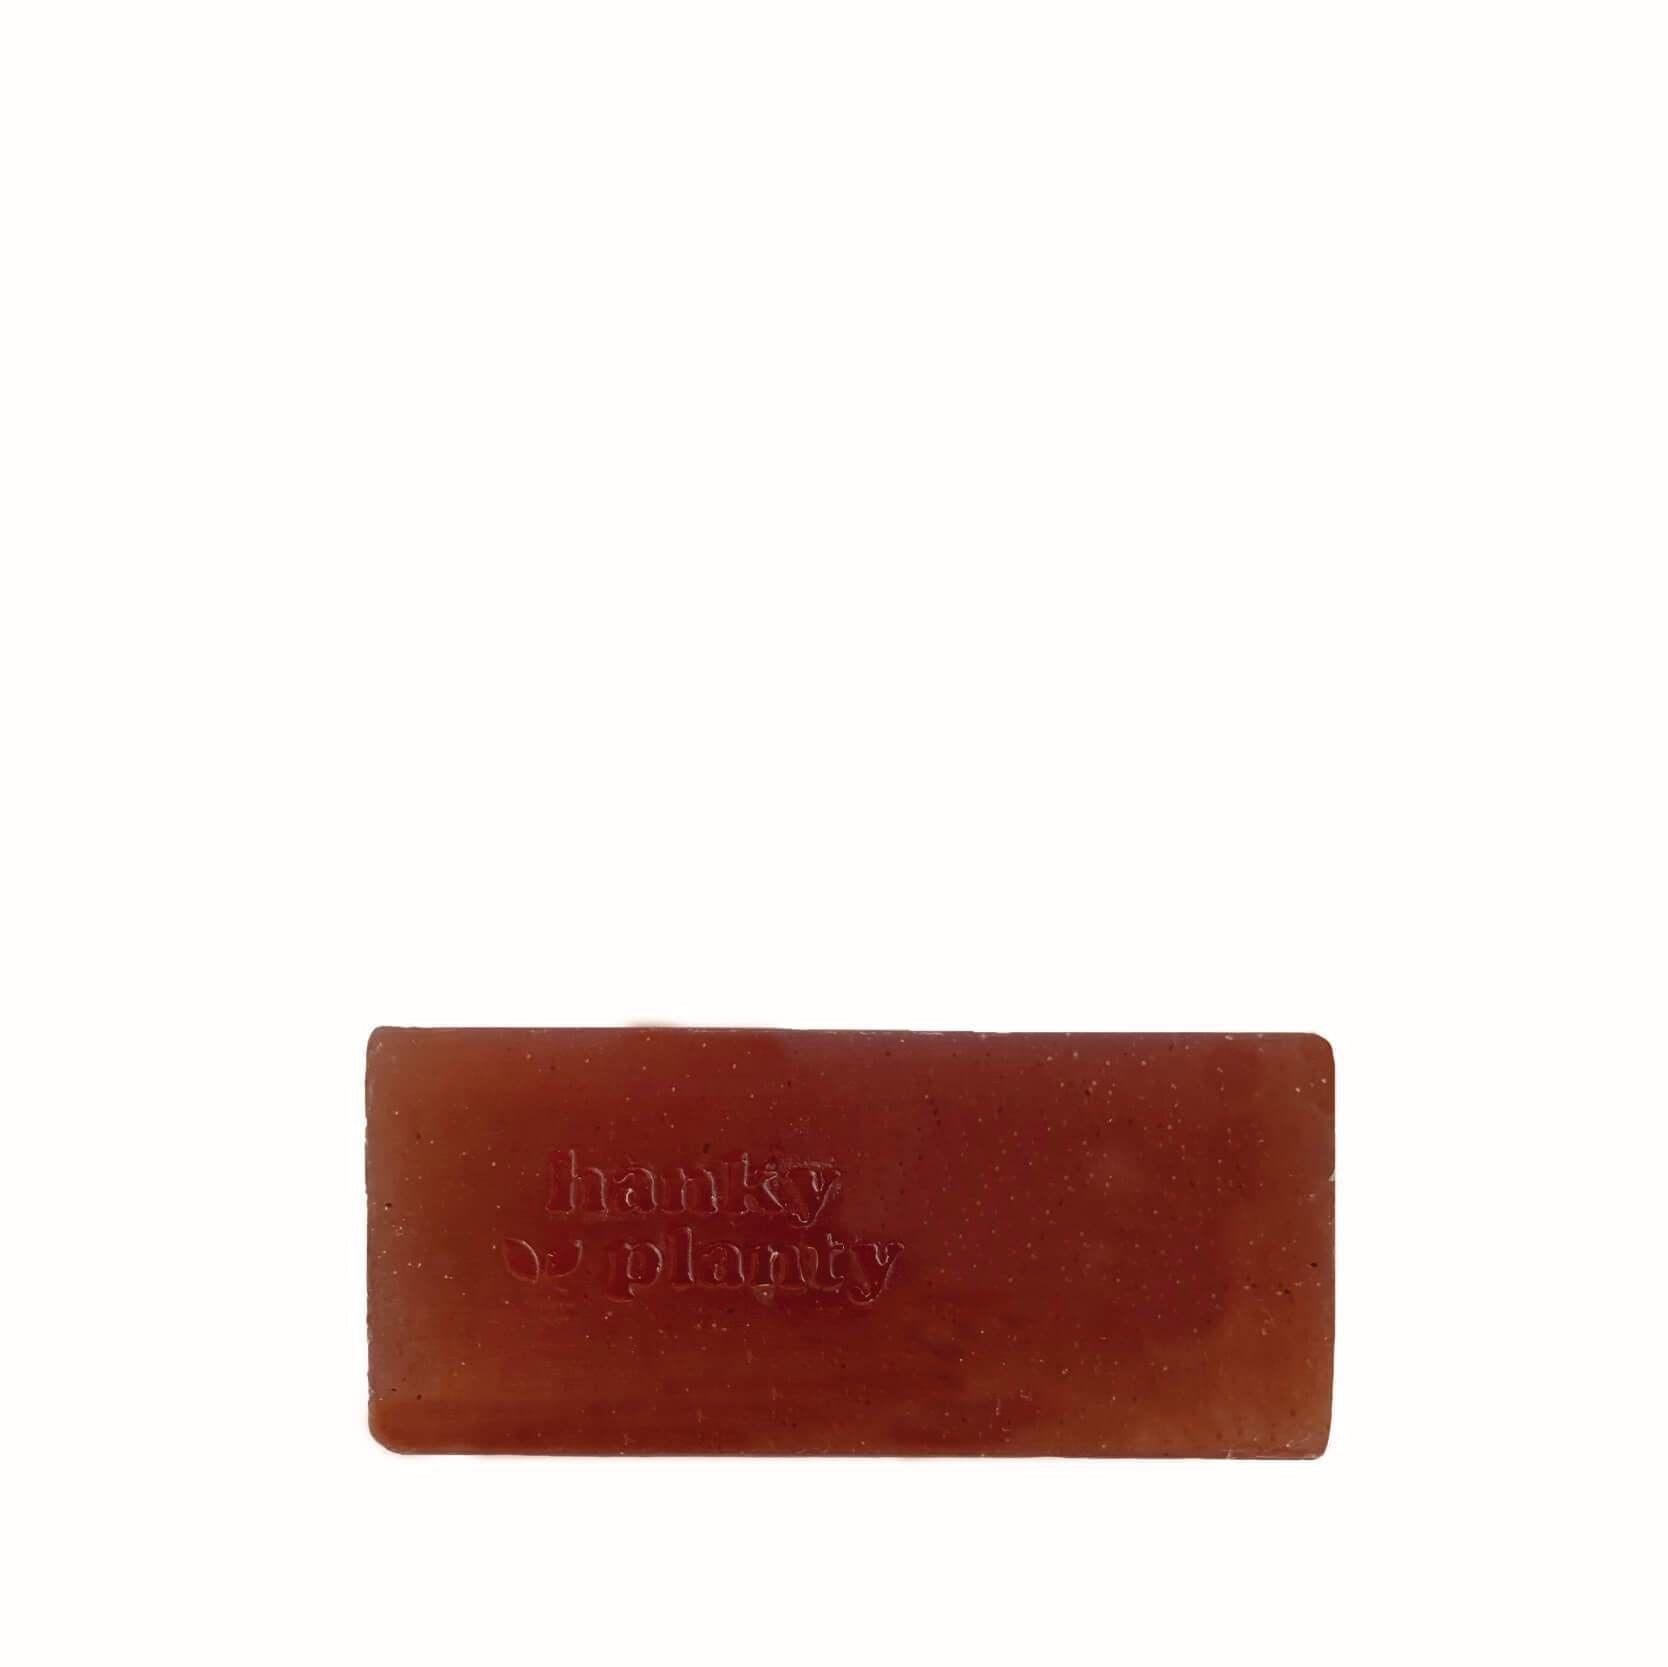 Hanky Planty Mangosteen with Bilberry Extract Soap Bar (145g).